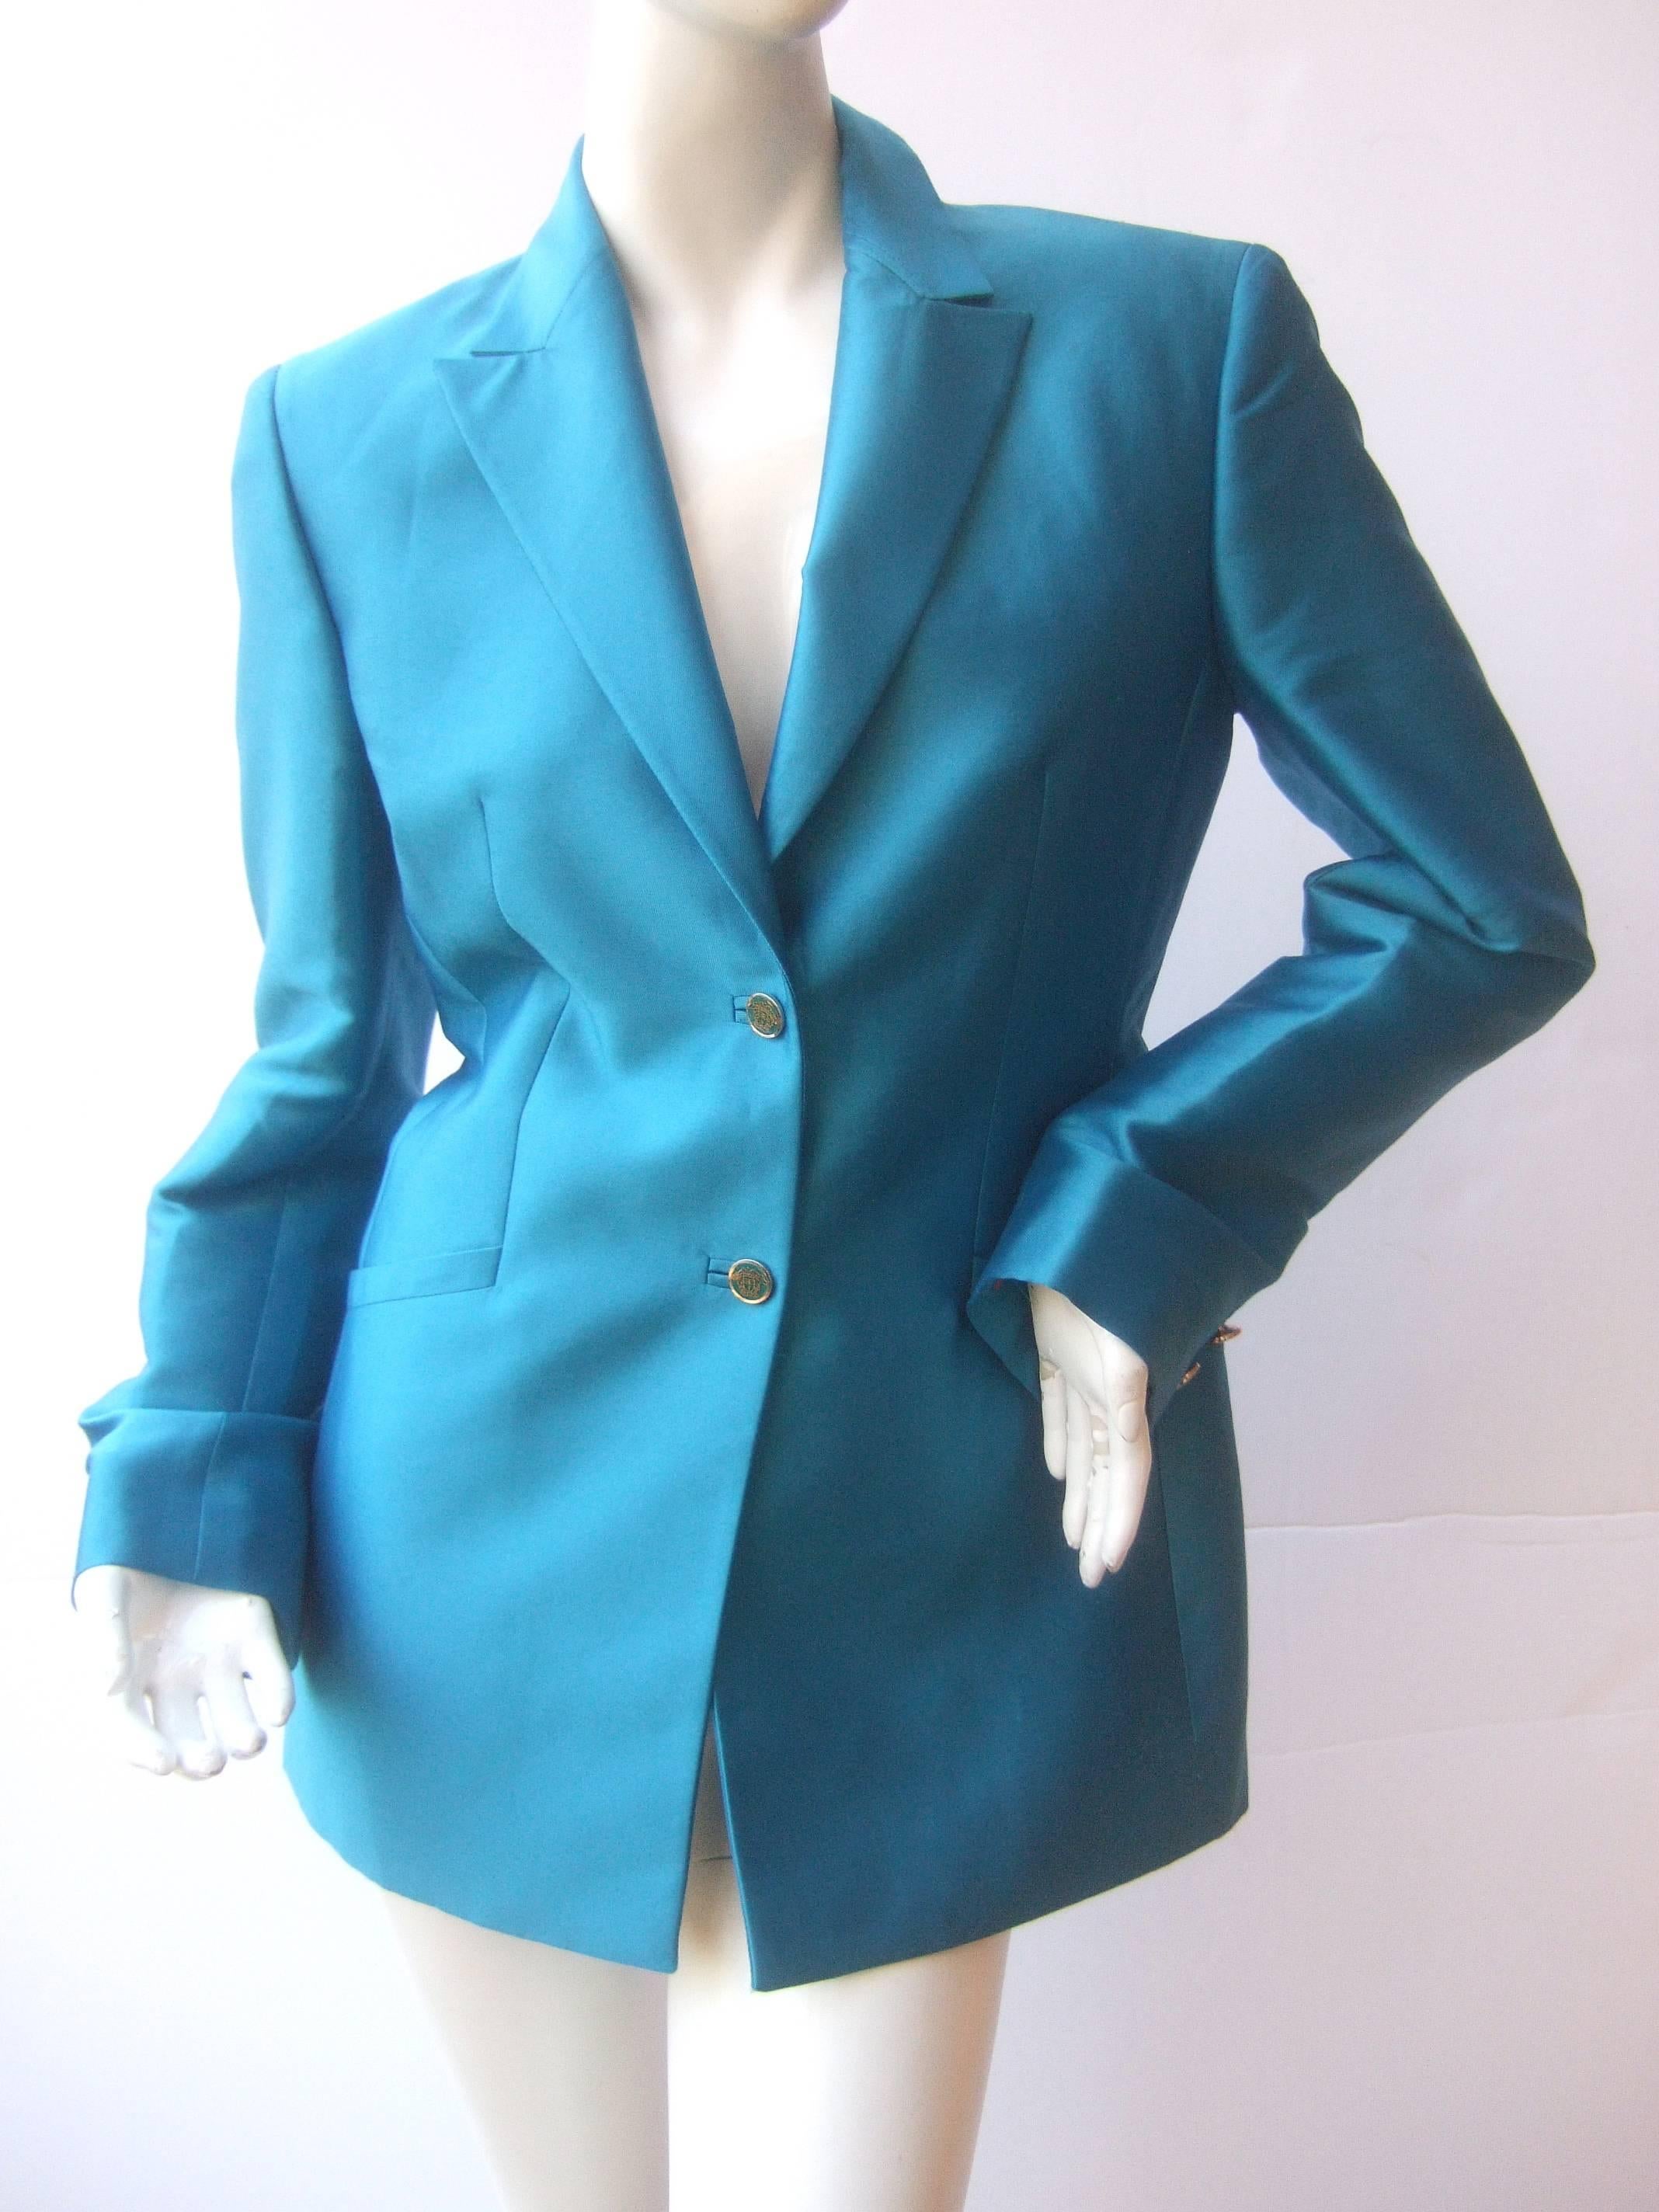 Versace Couture Turquoise silk shantung jacket 
The crisp Italian jacket is designed with luminous
aqua blue silk

The jacket is adorned with two Versace
medusa buttons on the front. The sleeve 
cuffs each have two matching medusa  
insignia